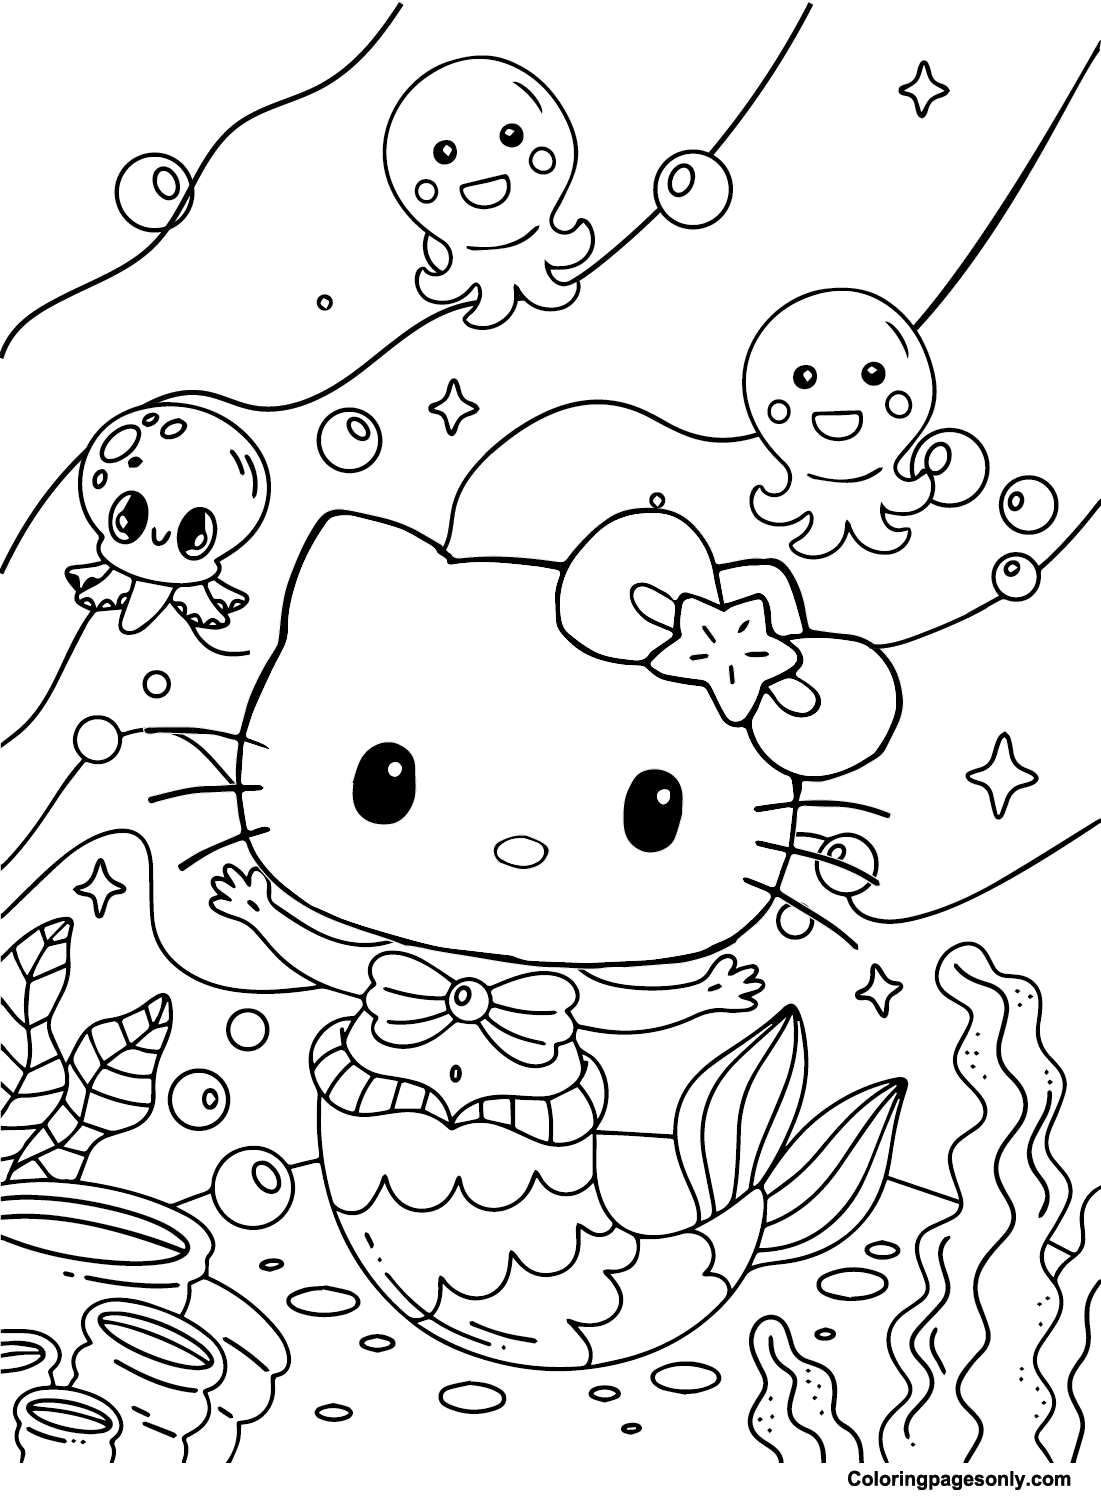 Lovely Hello Kitty Mermaid Coloring Page